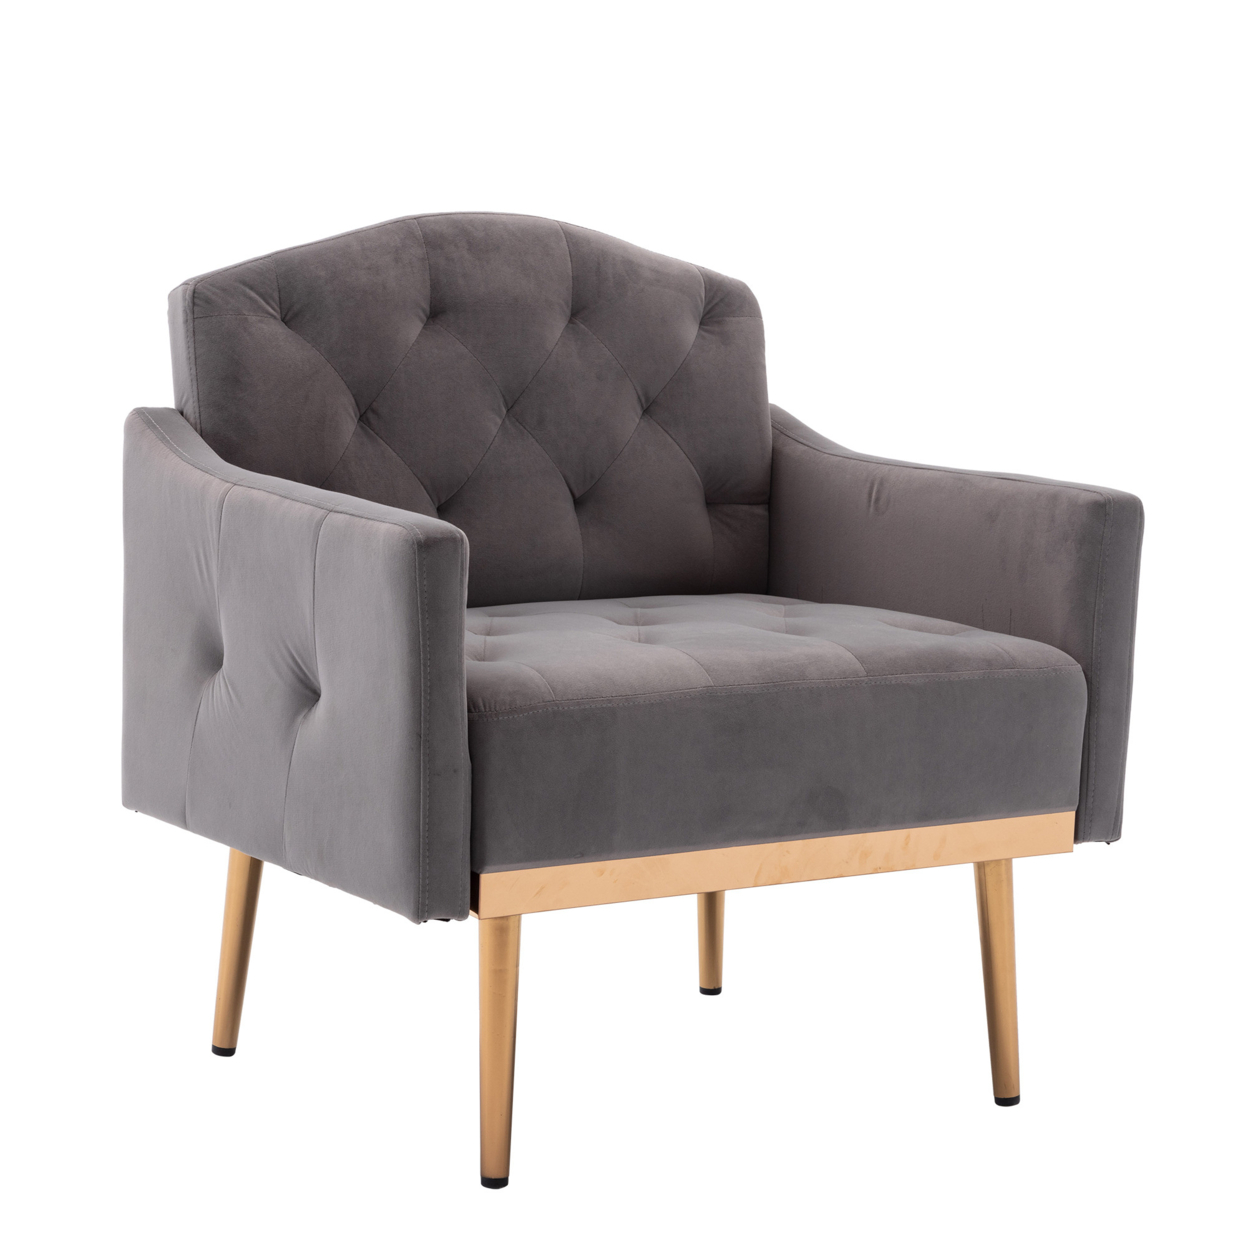 Accent Chair With Tufted Stitching Details And Metal Legs, Gray And Gold- Saltoro Sherpi